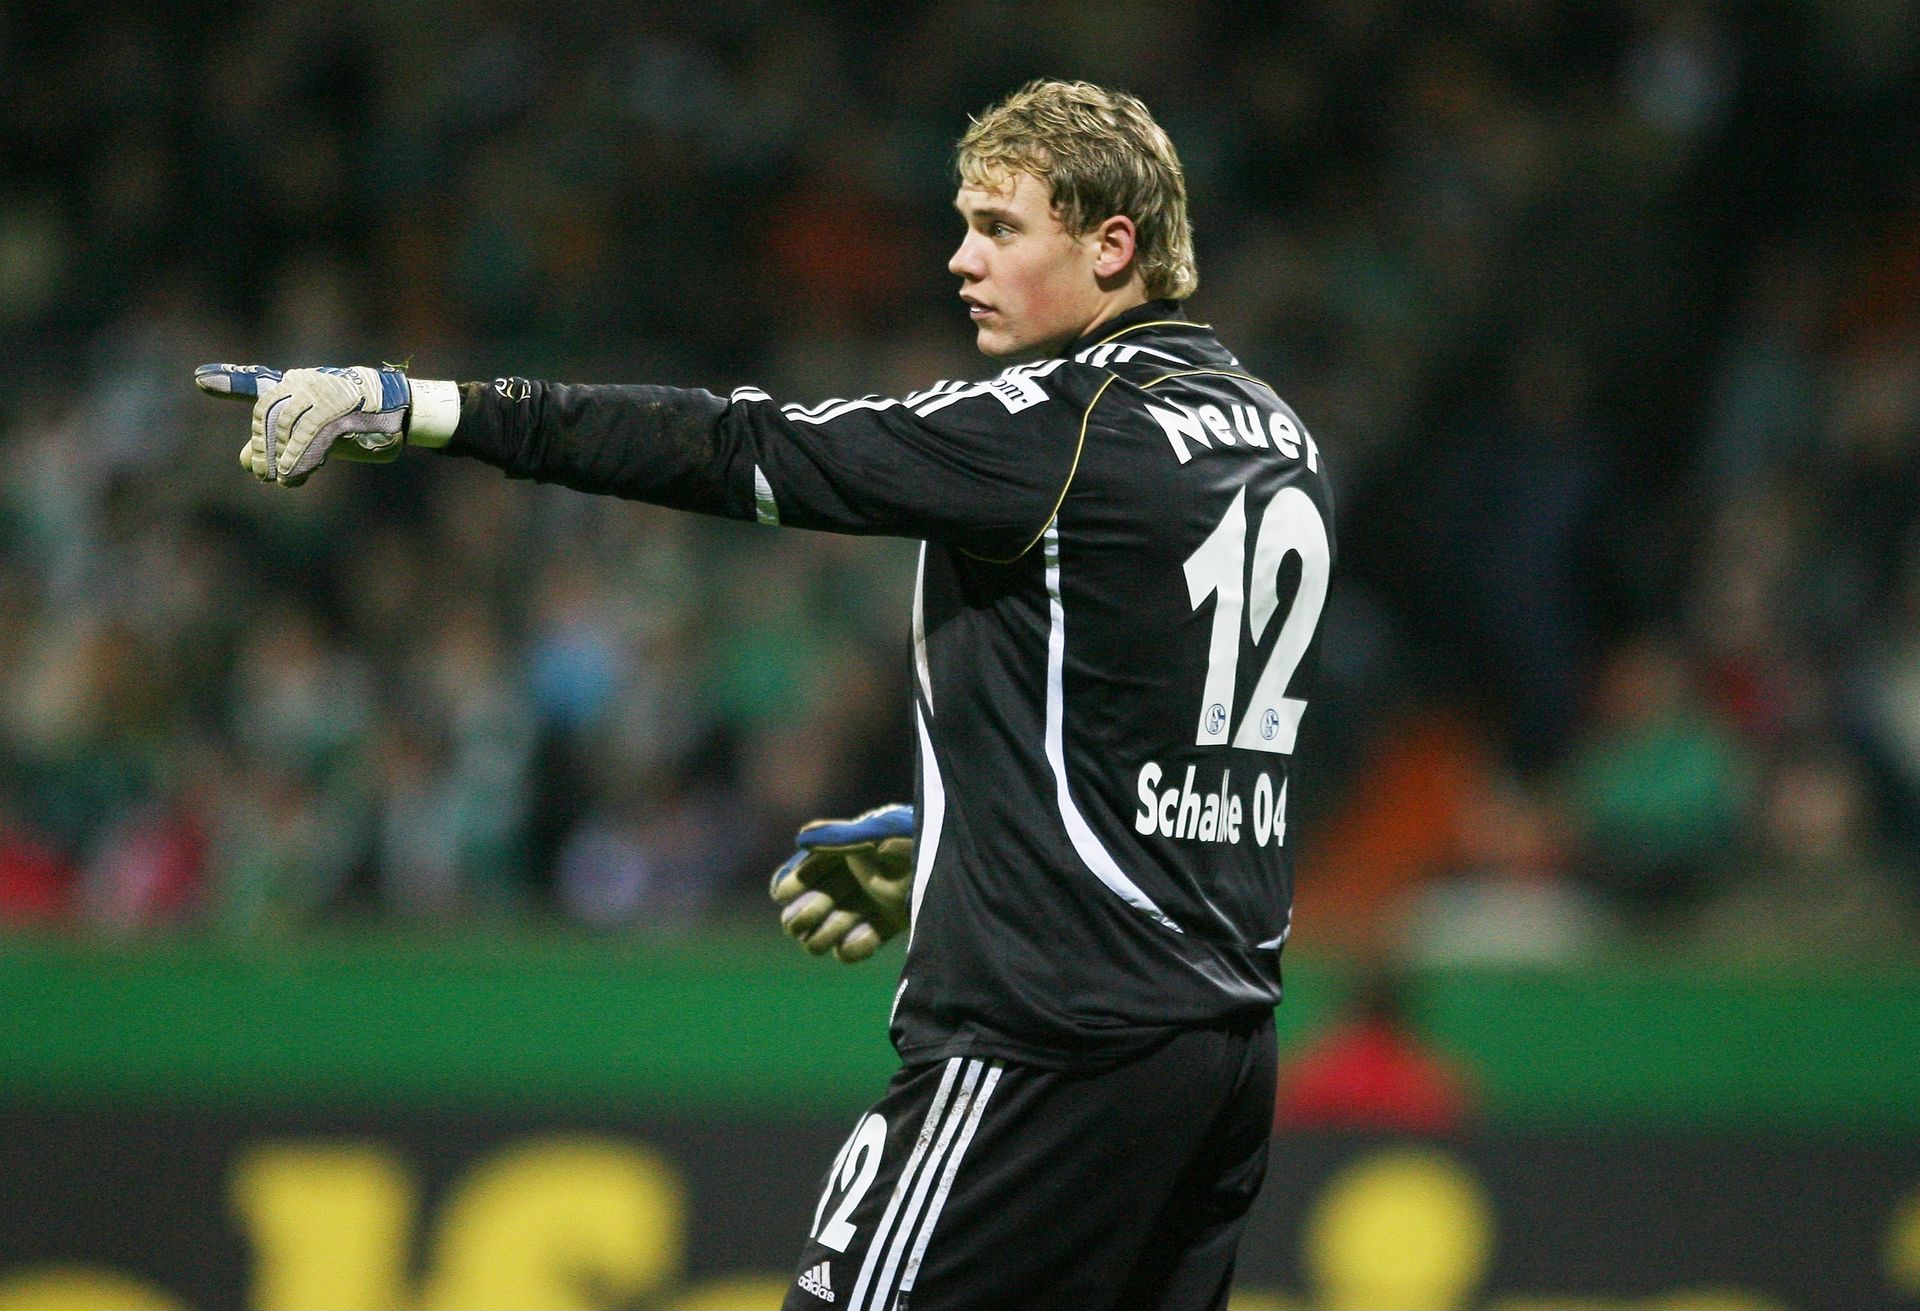 <p>                     Manuel Neuer's best years came later at Bayern Munich and as part of Germany's World Cup-winning team in 2014, but he was still a great goalkeeper in the 2000s.                   </p>                                      <p>                     Now regarded as one of the greatest goalkeepers in history, Neuer broke through in the 2006/07 season at Schalke and impressed in those early years. He made his Germany debut in 2009.                   </p>